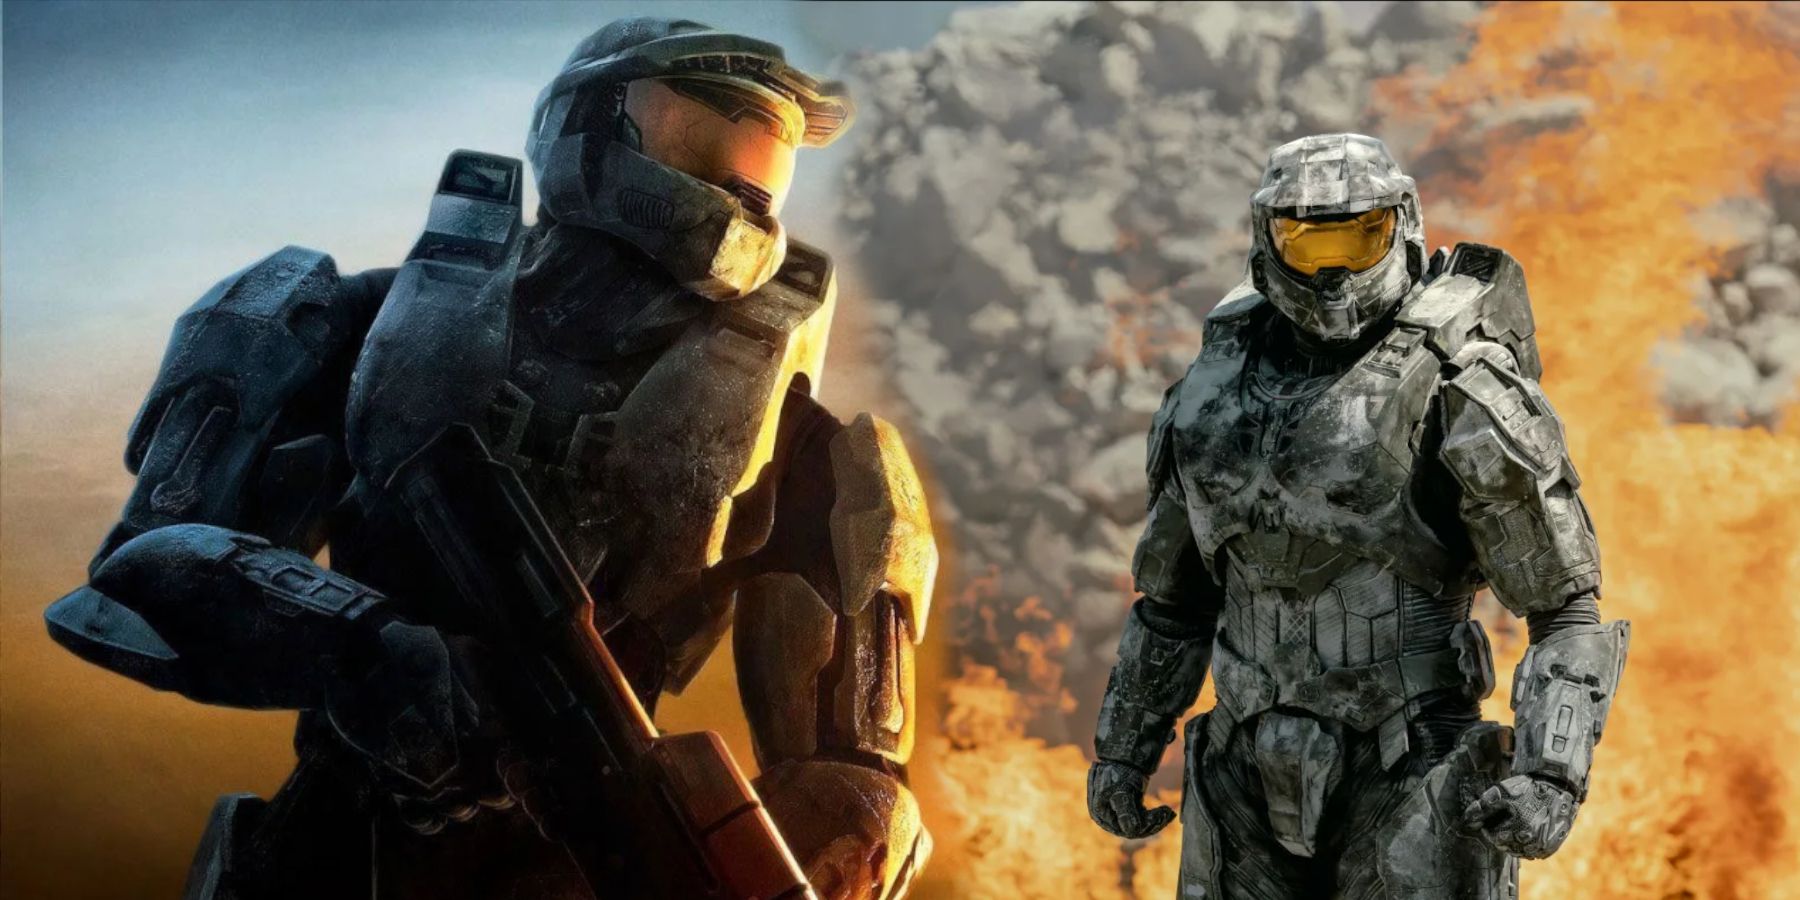 Master Chief as he appears in Halo 3 next to Master Chief as he appears in Paramount Plus's Halo TV series.